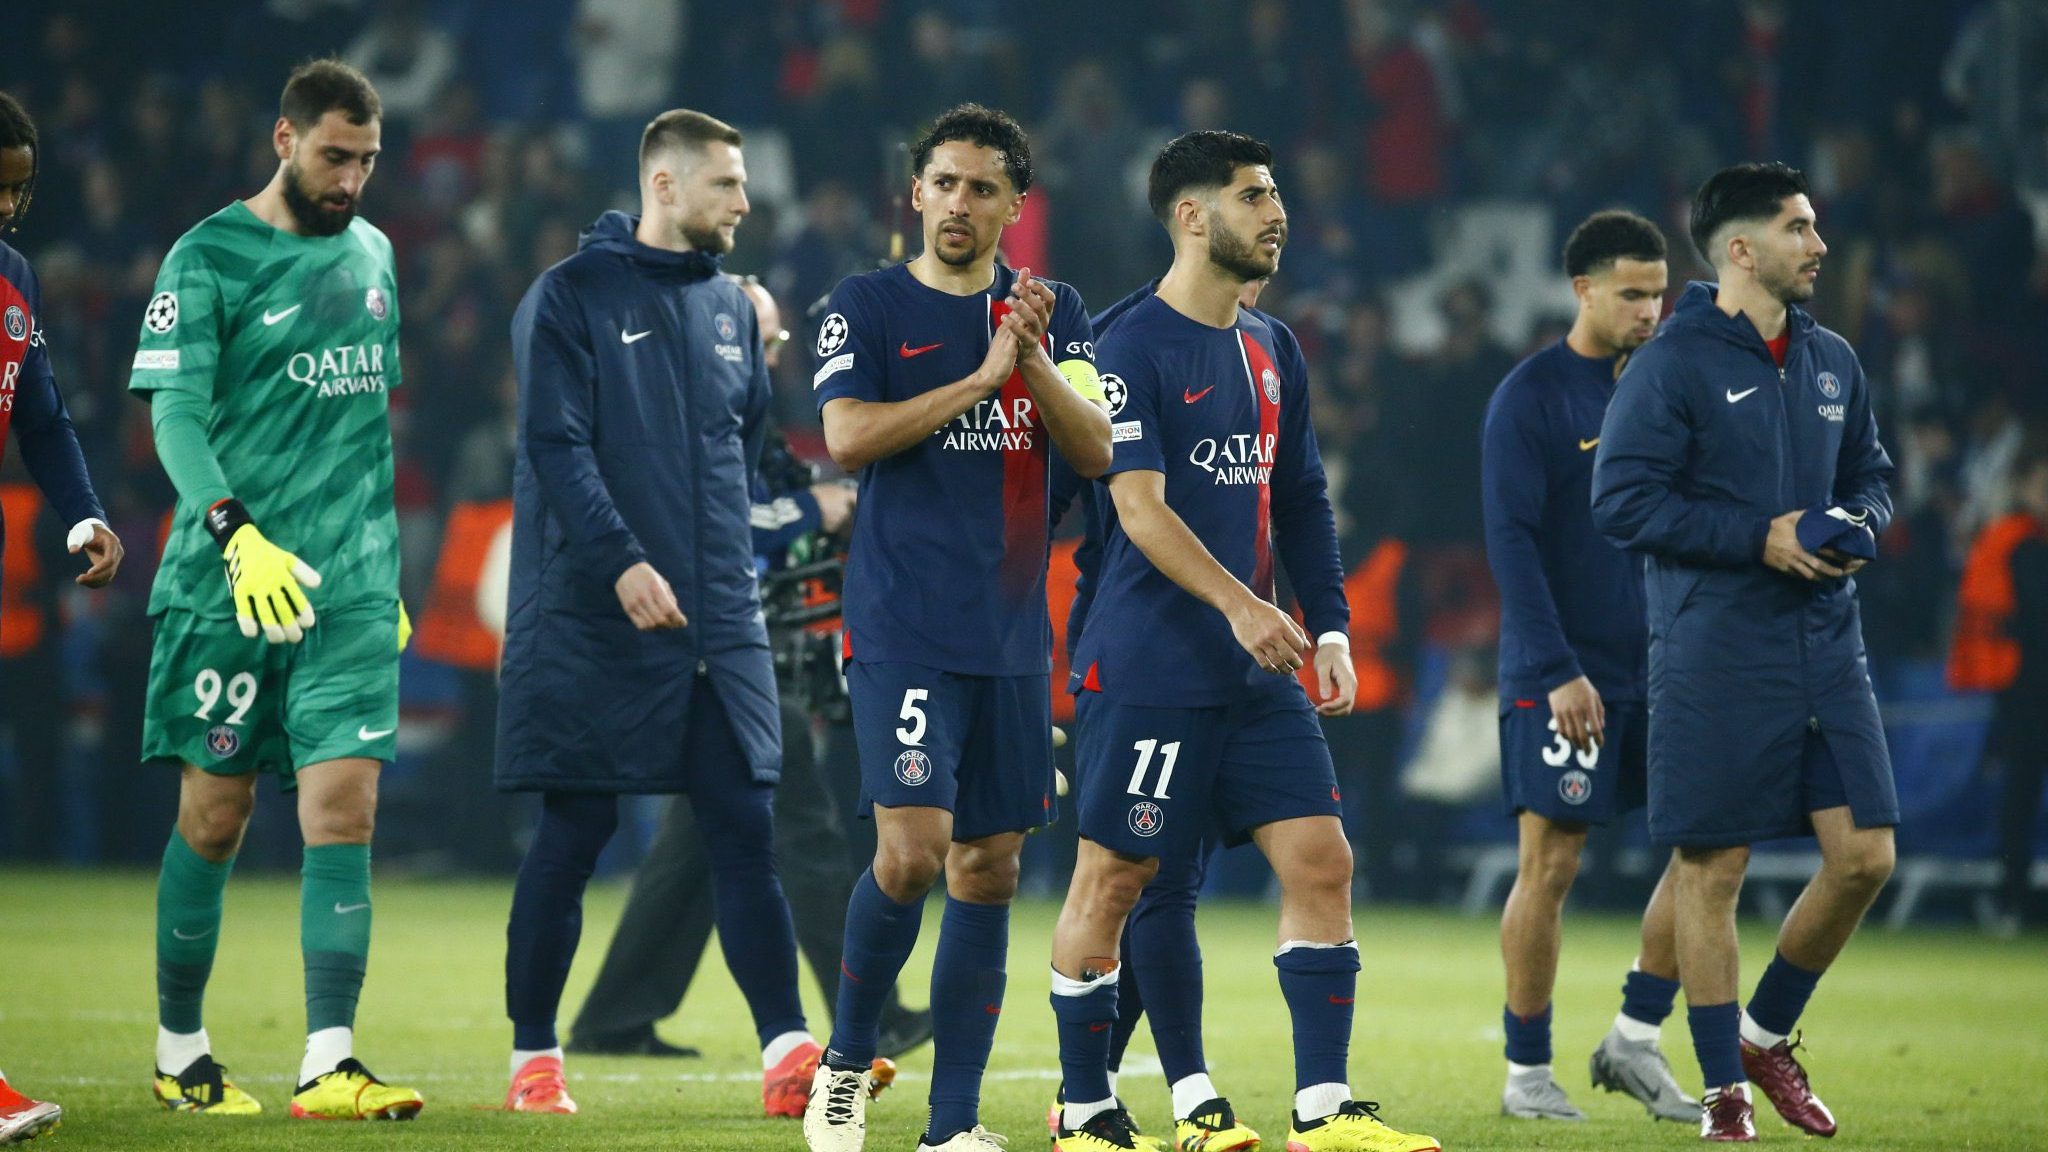 End of an era? PSG eliminated in what could be Mbappe’s last Champions League game with the team